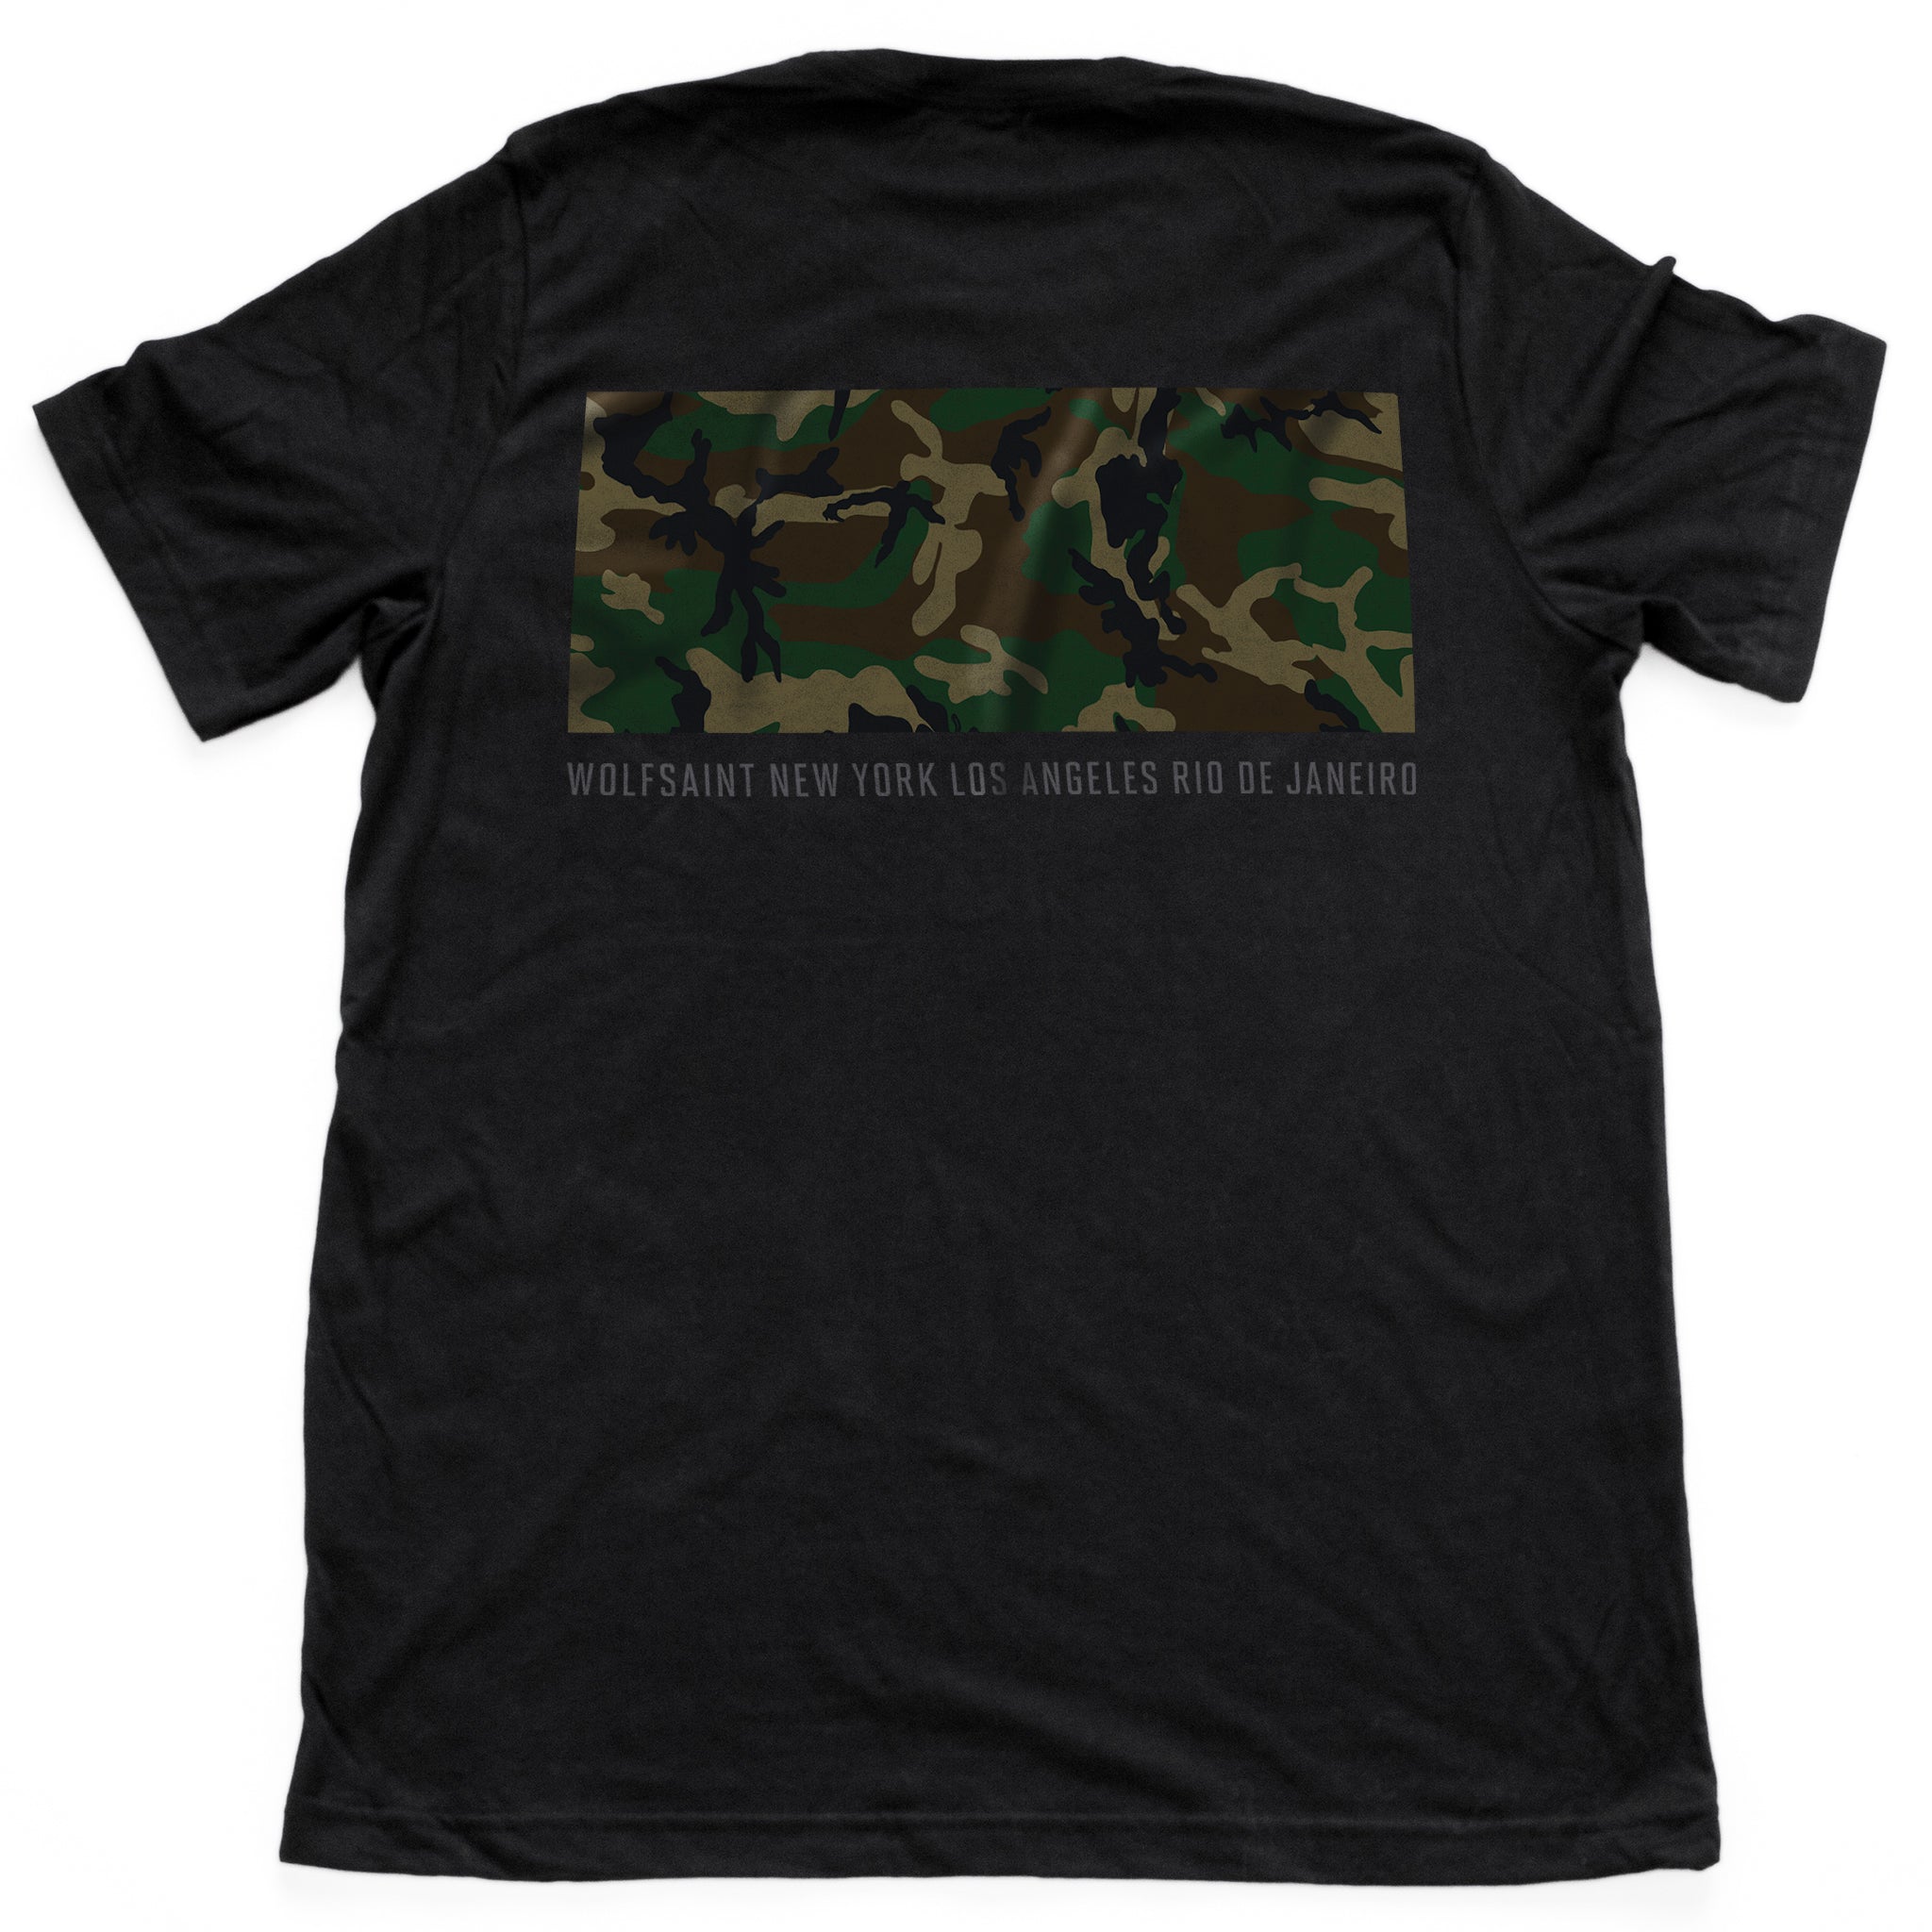 The back side of a fashionable black t-shirt with a camo / camouflage panel on both sides. On the front there is also a Wolfsaint script logo within the camo panel; on the reverse are the Wolfsaint cities “New York, Rio de Janeiro, Los Angeles” listed innsmaller type below the camouflage. From Wolfsaint.net